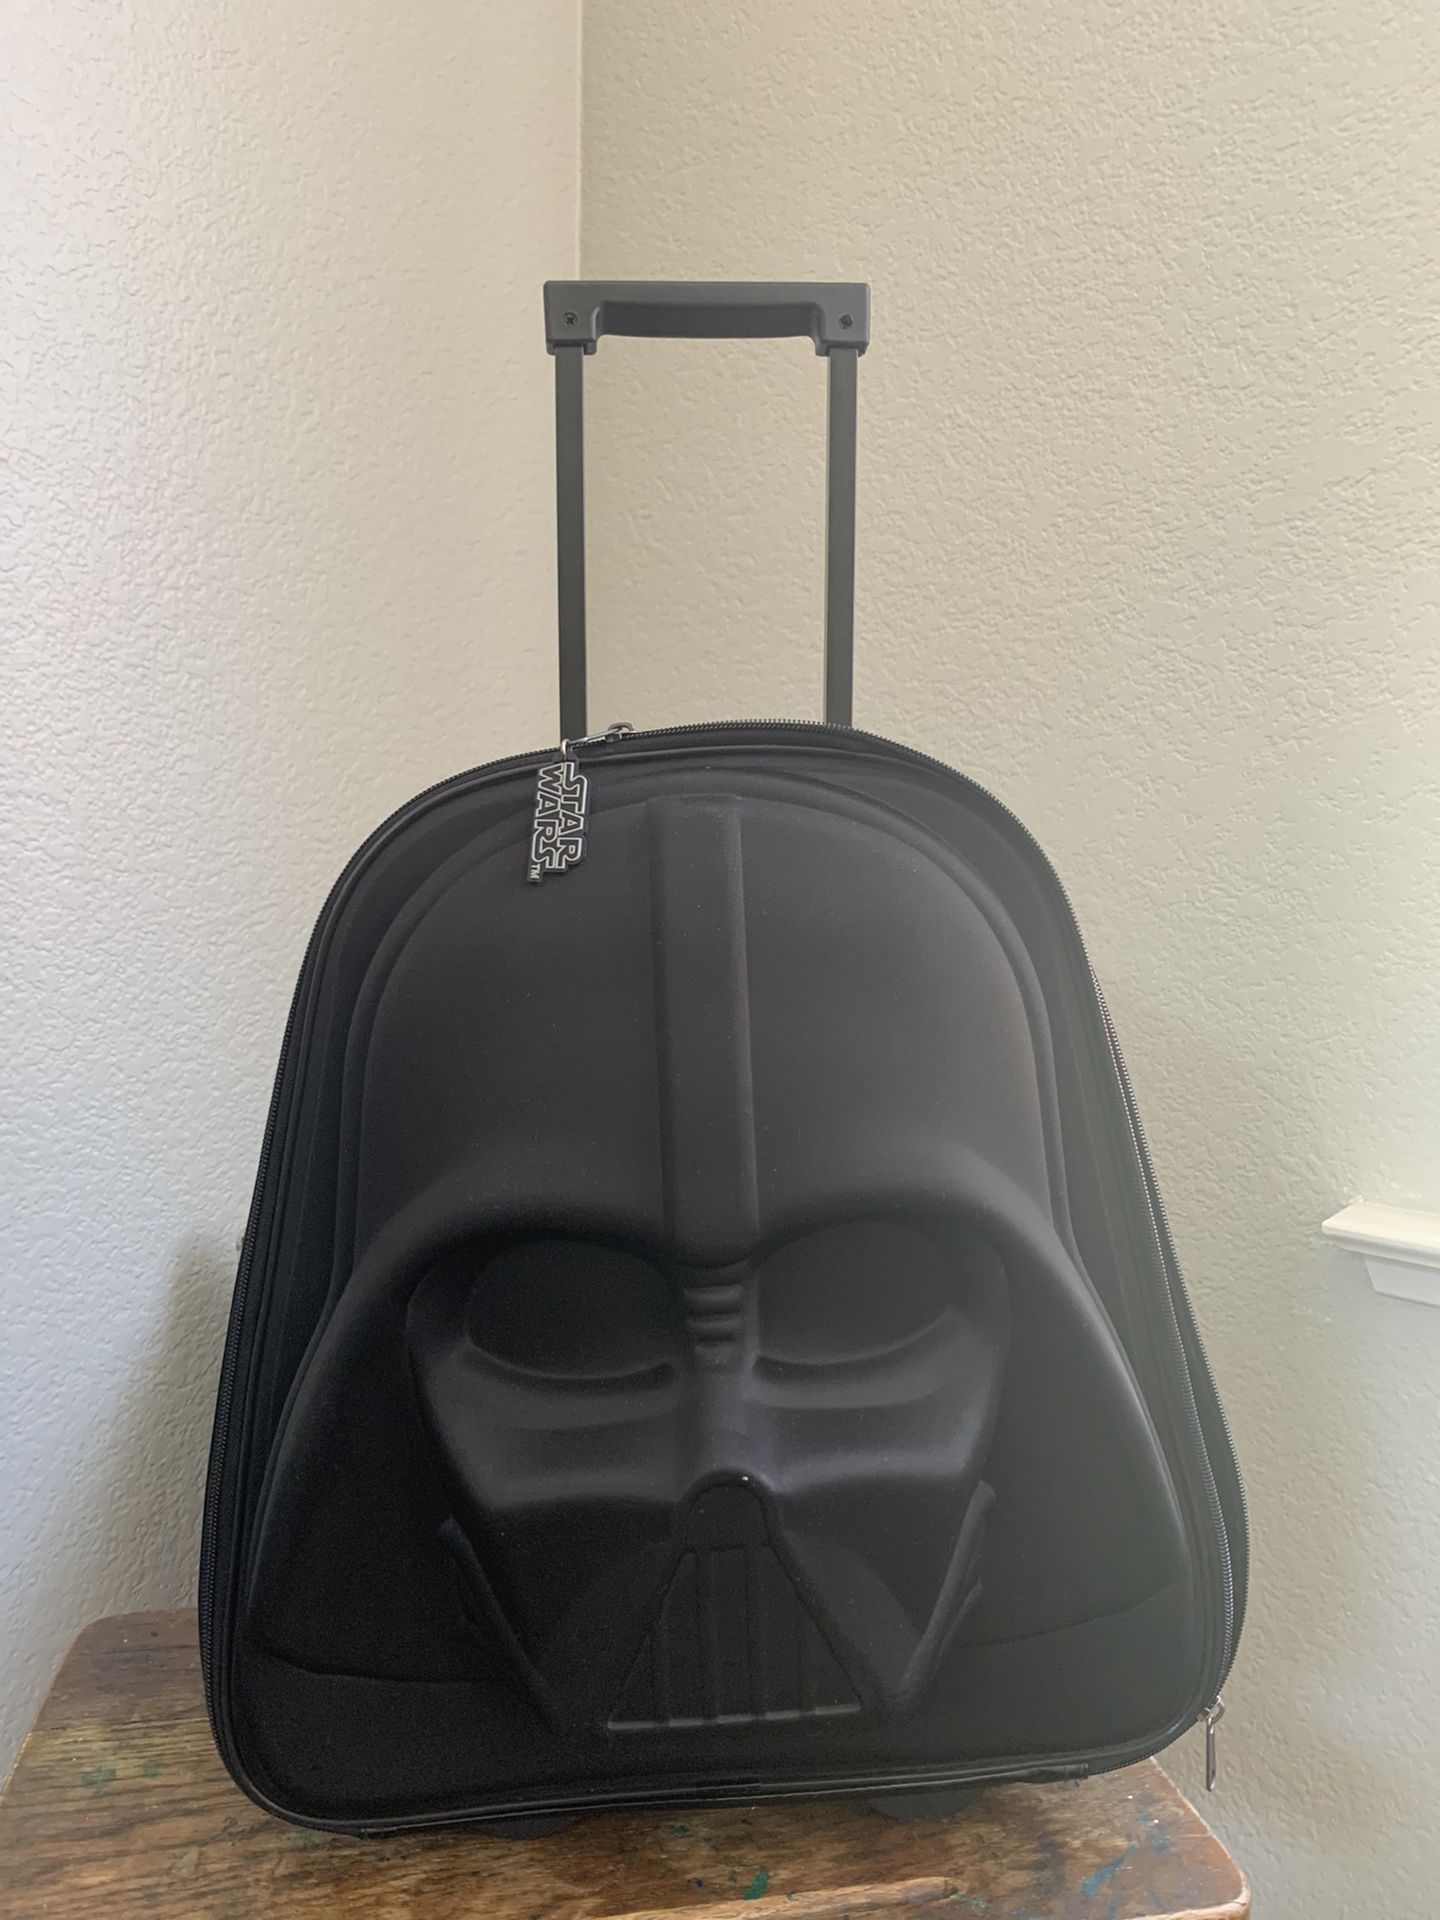 Disney Store Star Wars Darth Vader 3D Rolling Luggage Suitcase Light Up